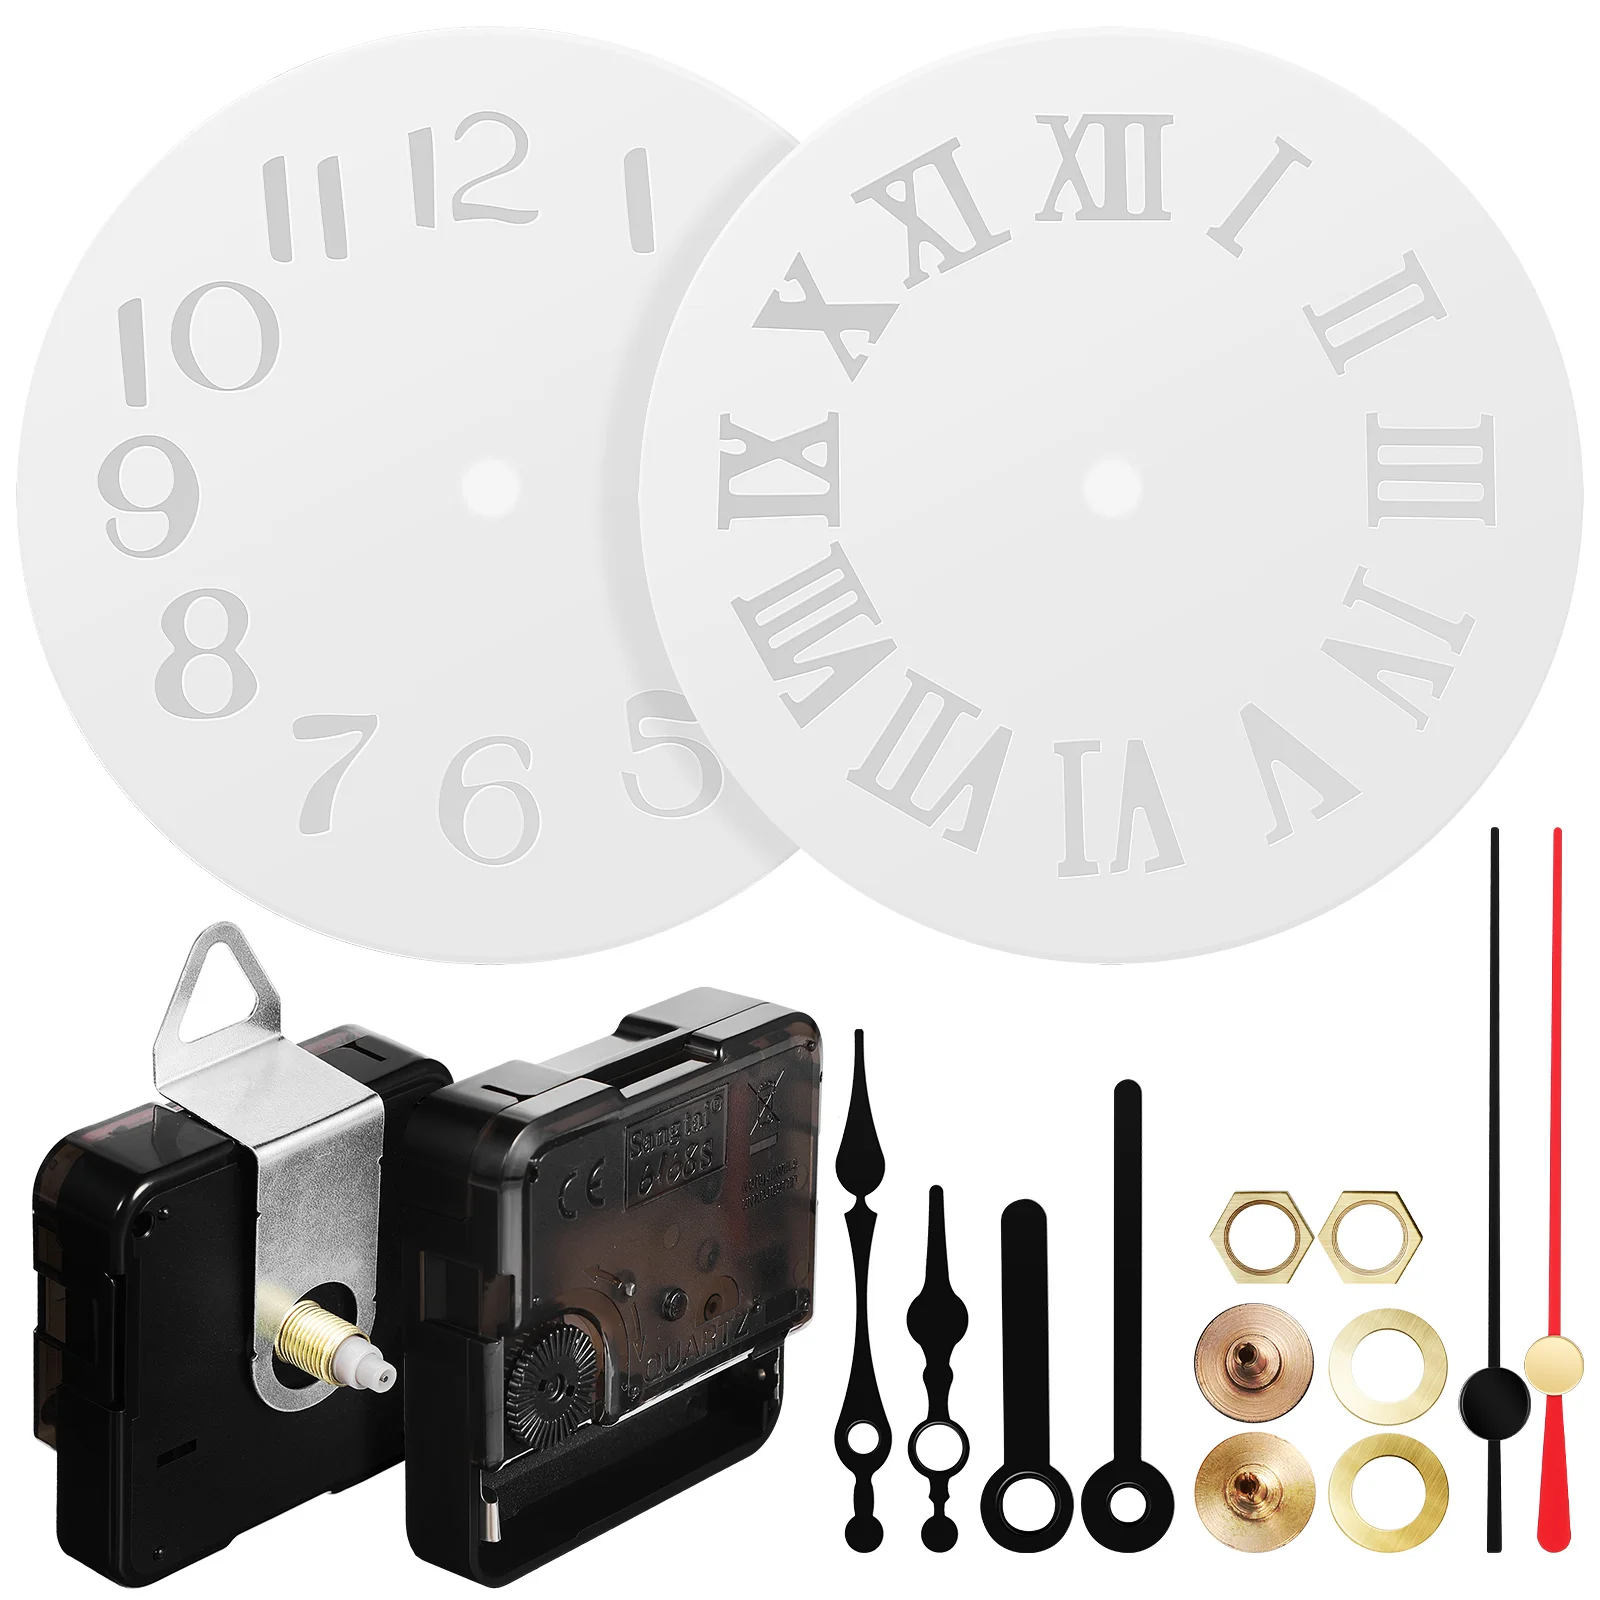 

2 Sets Alarm Clock Digital Silicone Mold Hands Motor Kit Molds Hook Mechanism Operated Wall Replacement Works